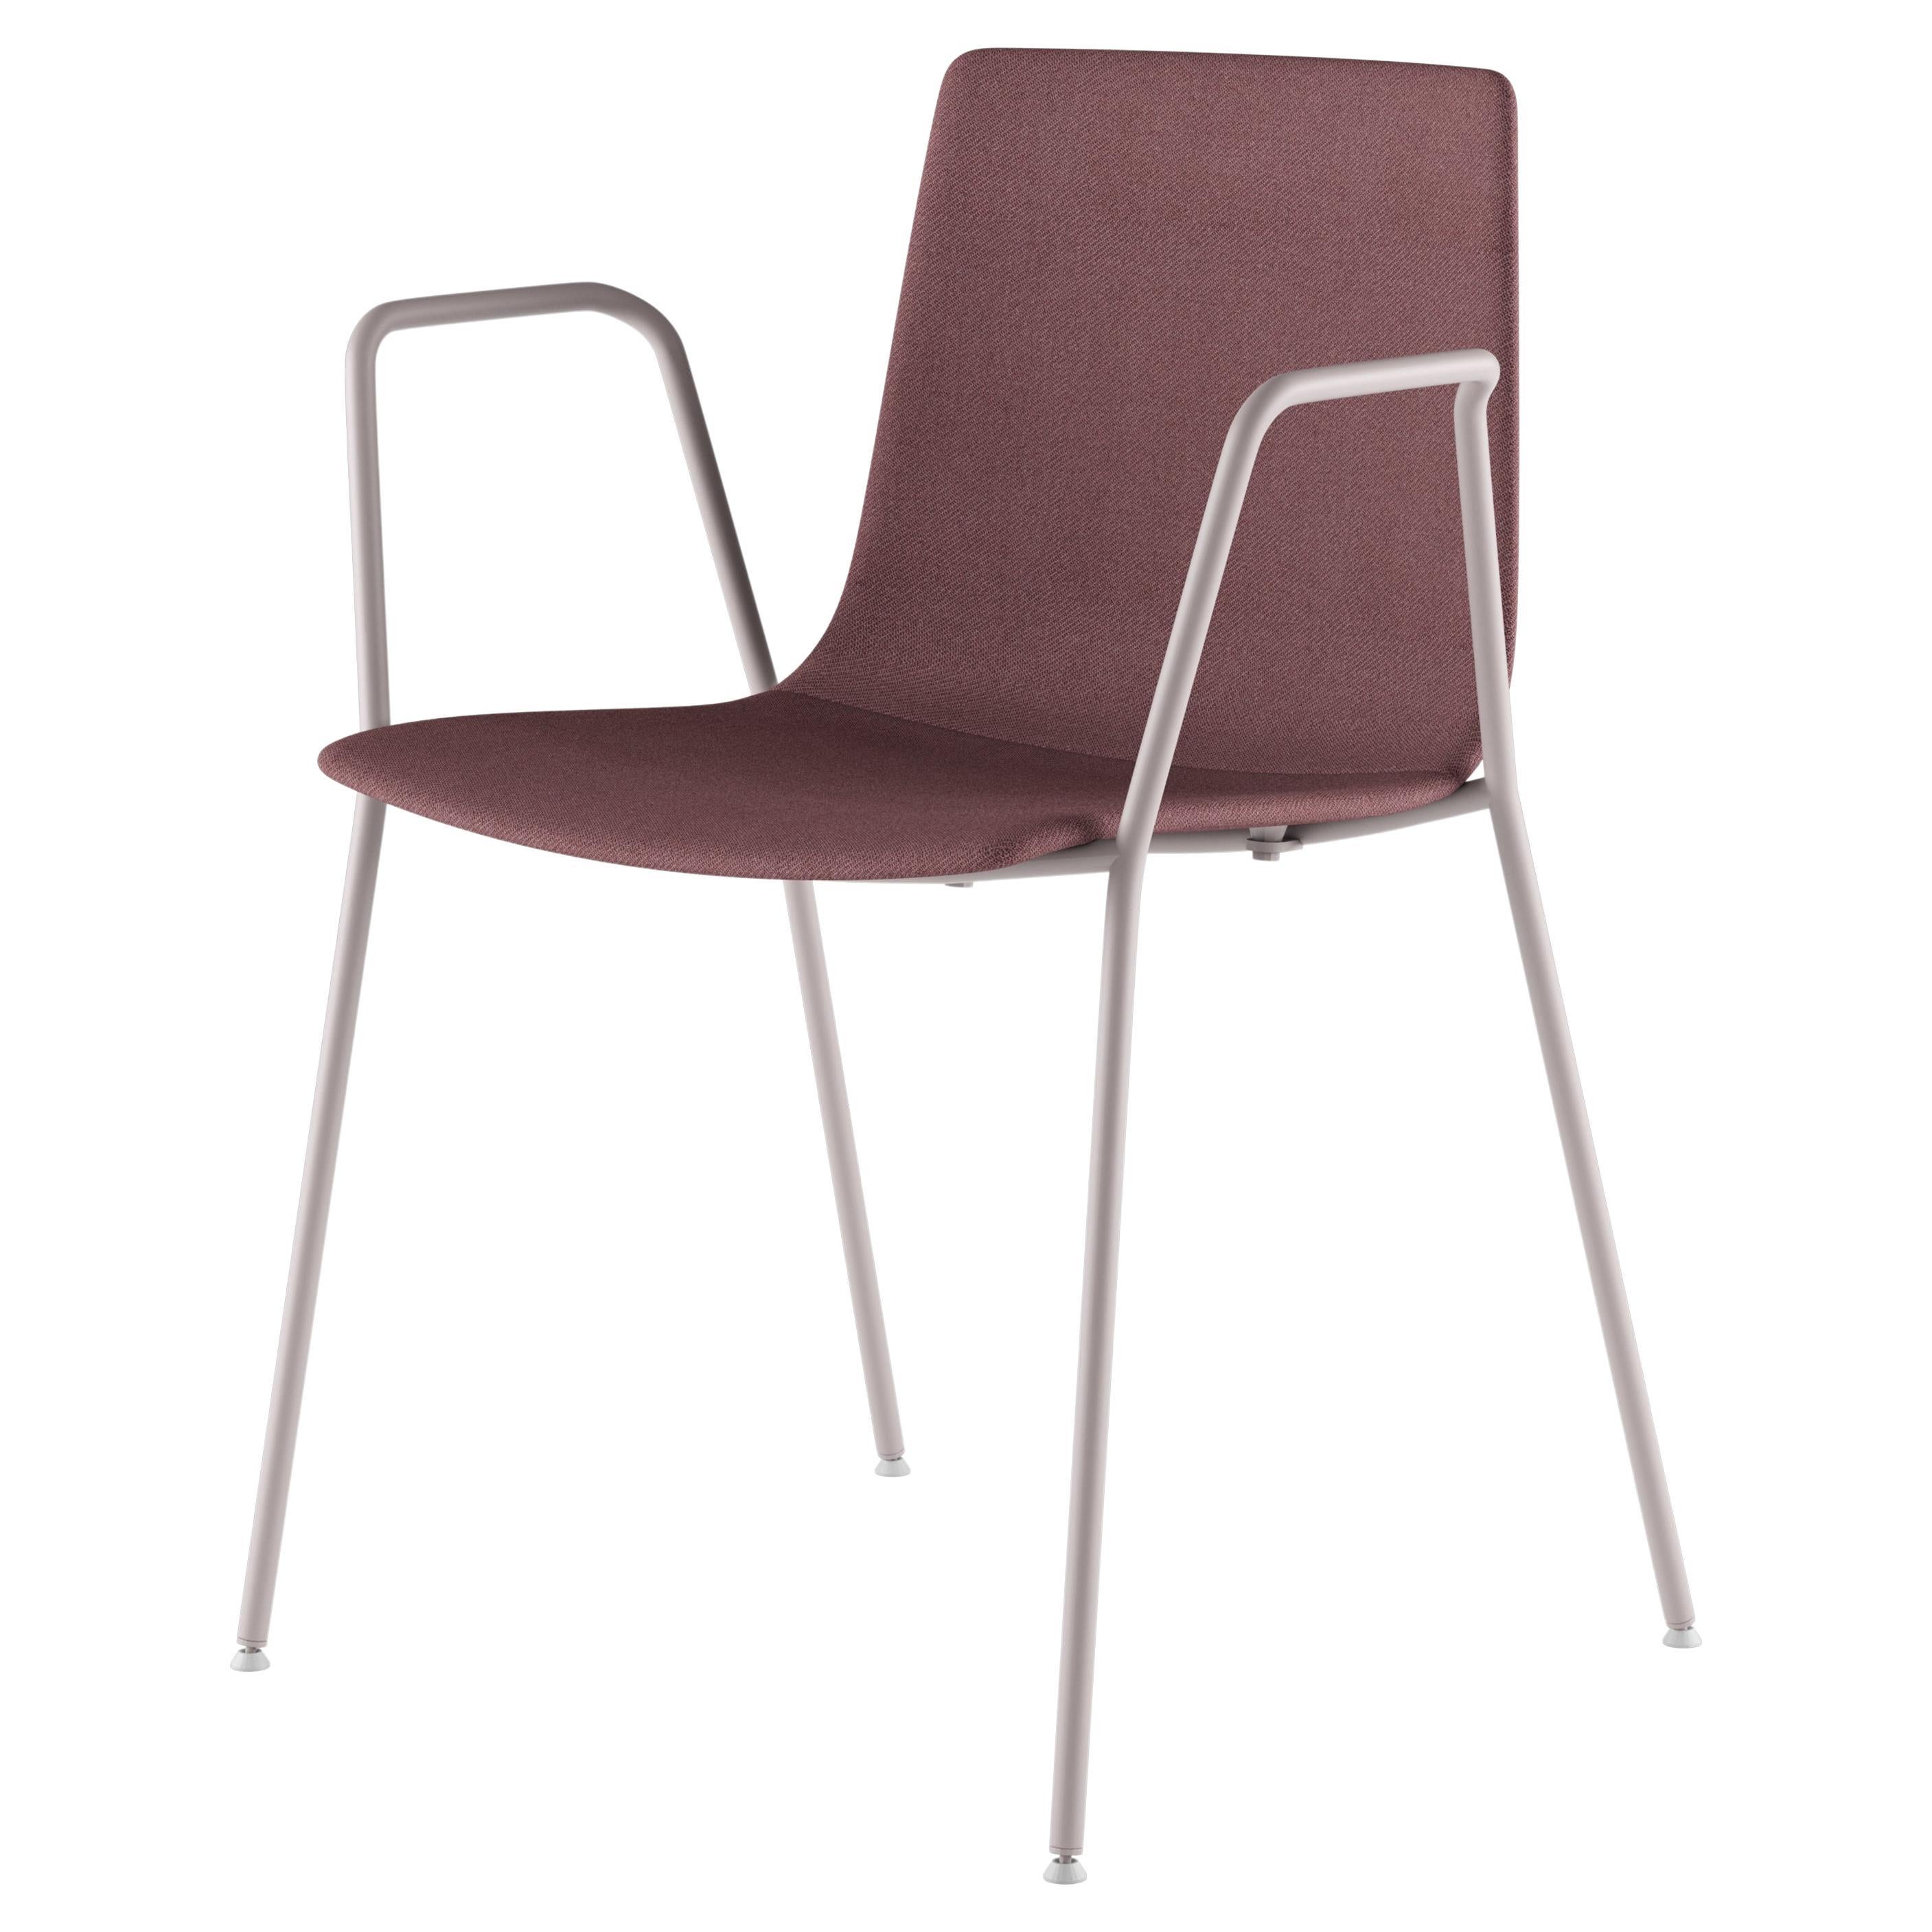 Alias 89G Slim Chair 4 Arm Soft L in Maroon with White Lacquered Steel Frame For Sale